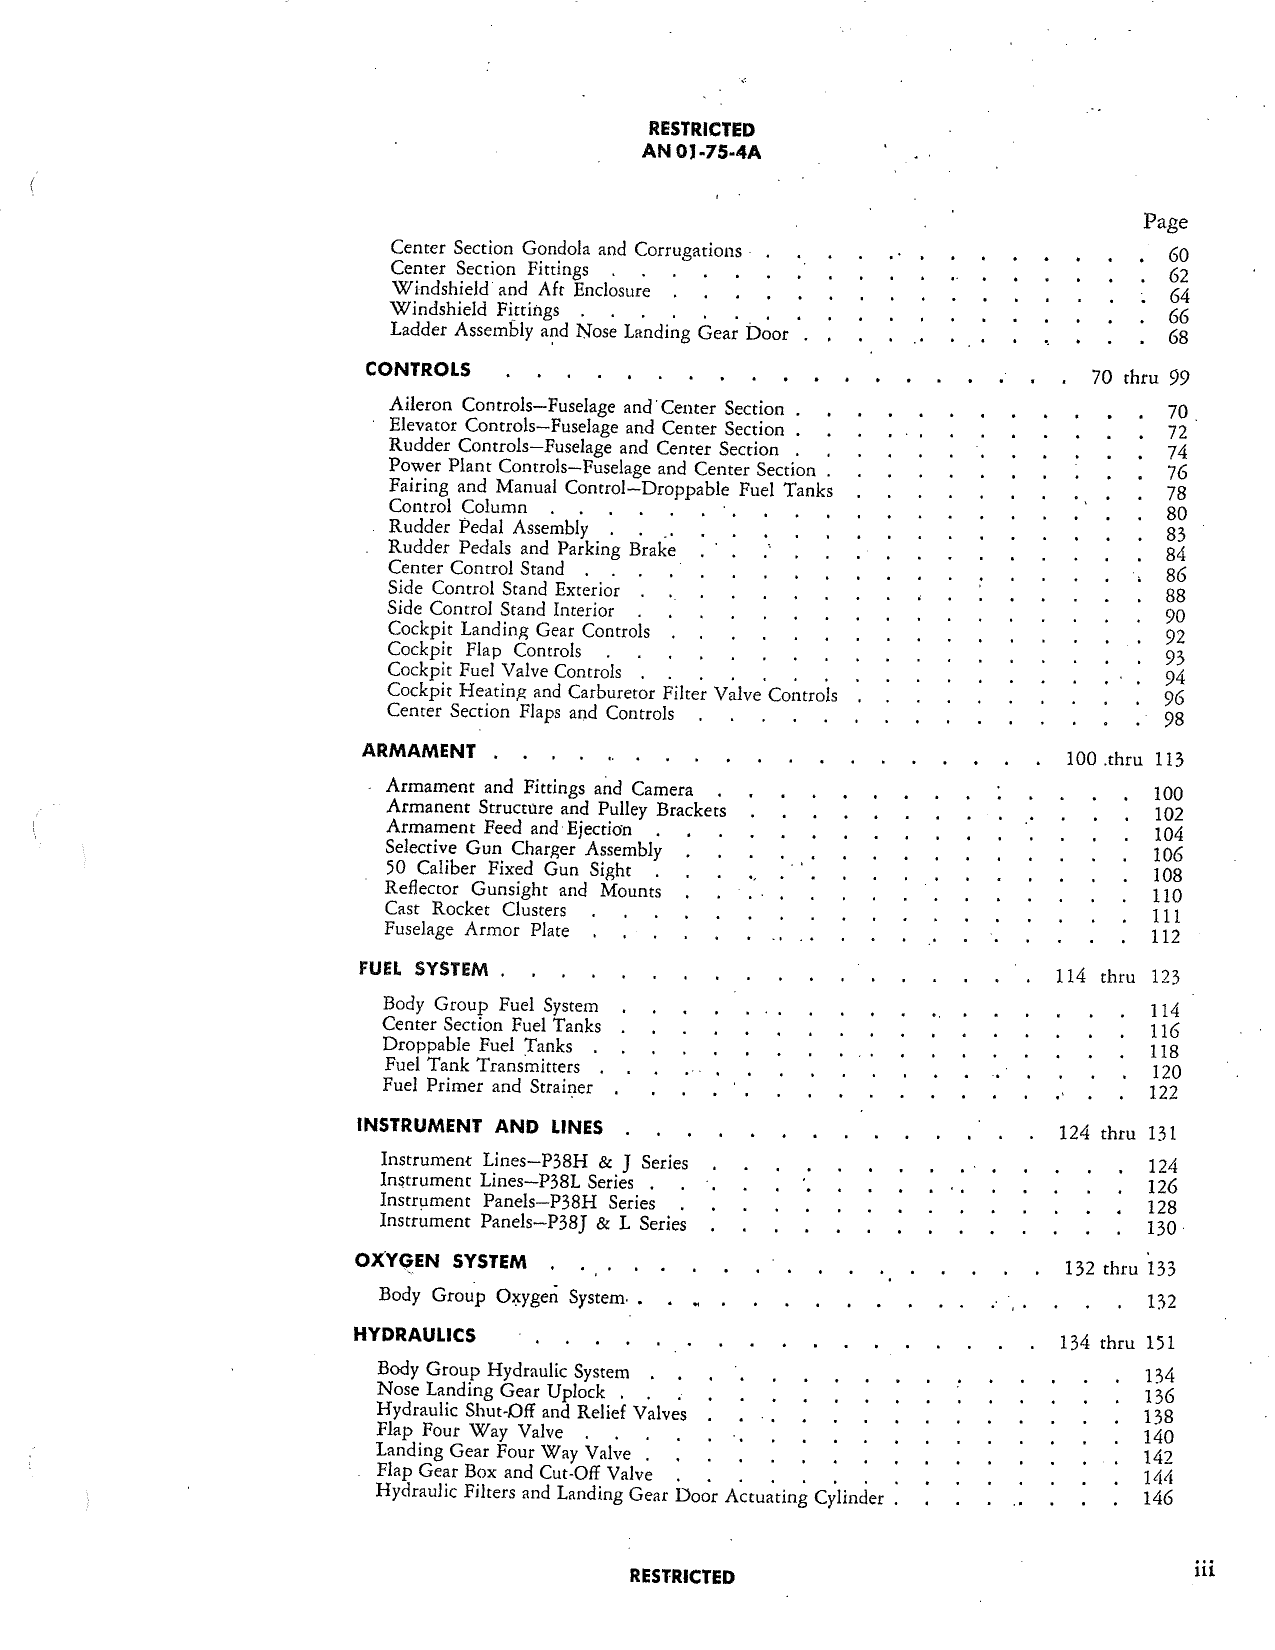 Sample page 5 from AirCorps Library document: Parts Catalog for Airplane Models P-38H, P-38J, P-38L, and F-5B